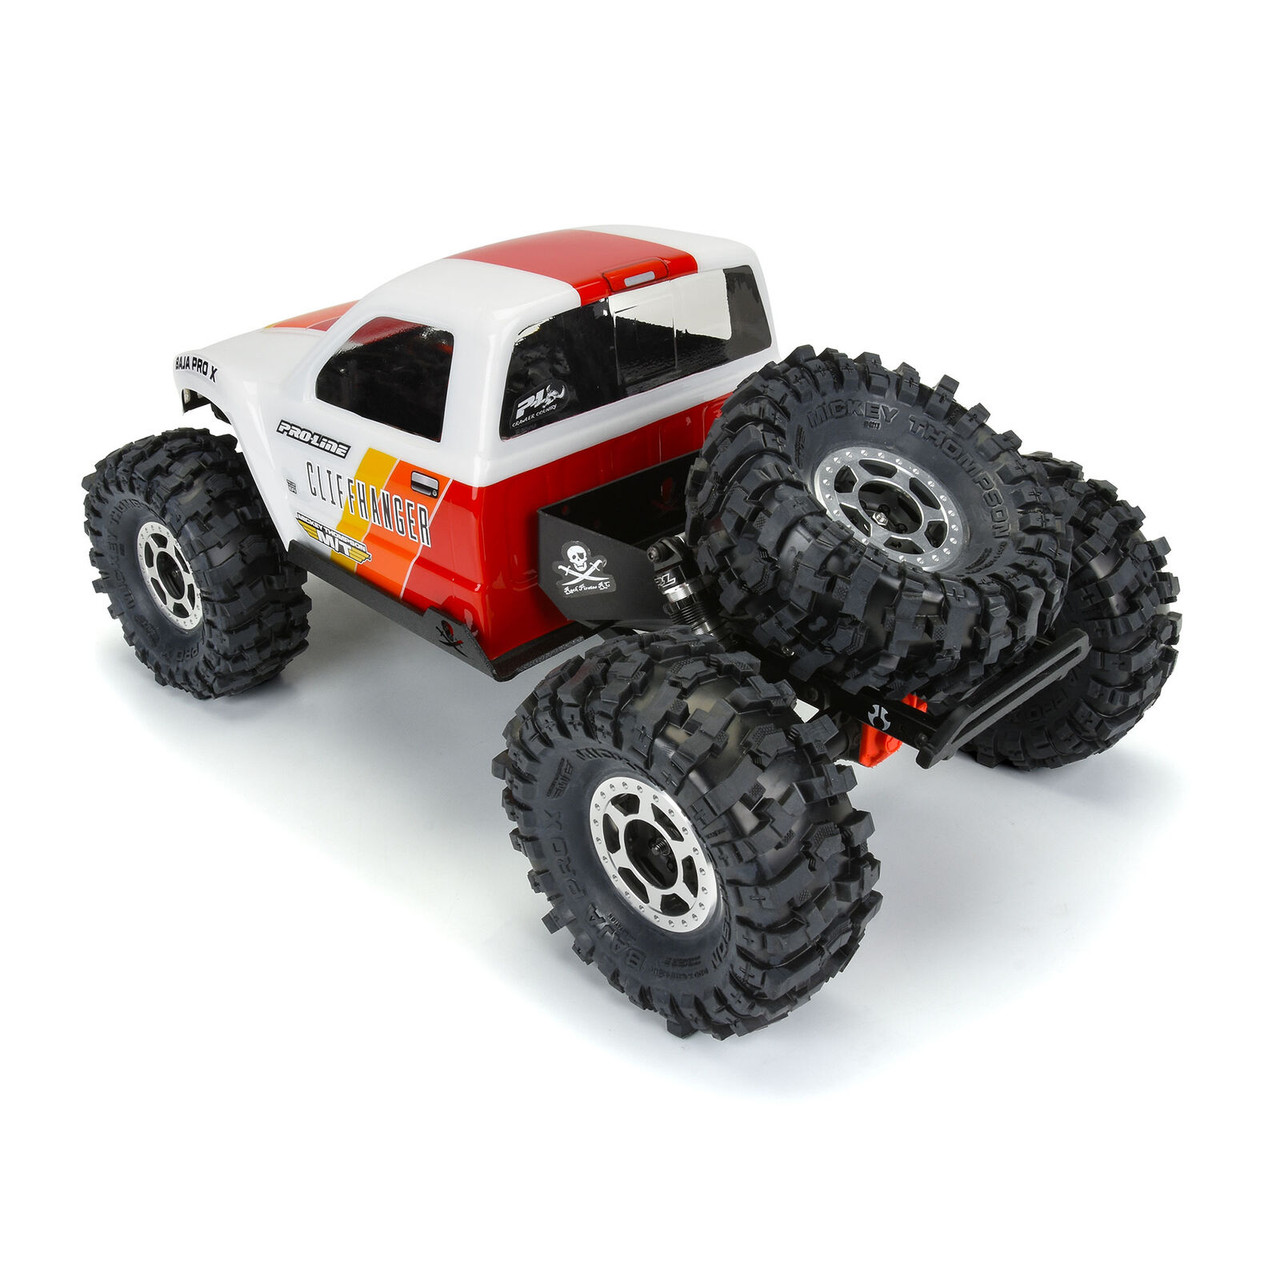 Pro-Line 3615-00 1/10 Cliffhanger HP Cab-Only Clear Body 12.3 (313mm) WB  Crawlers - Nitro Hobbies